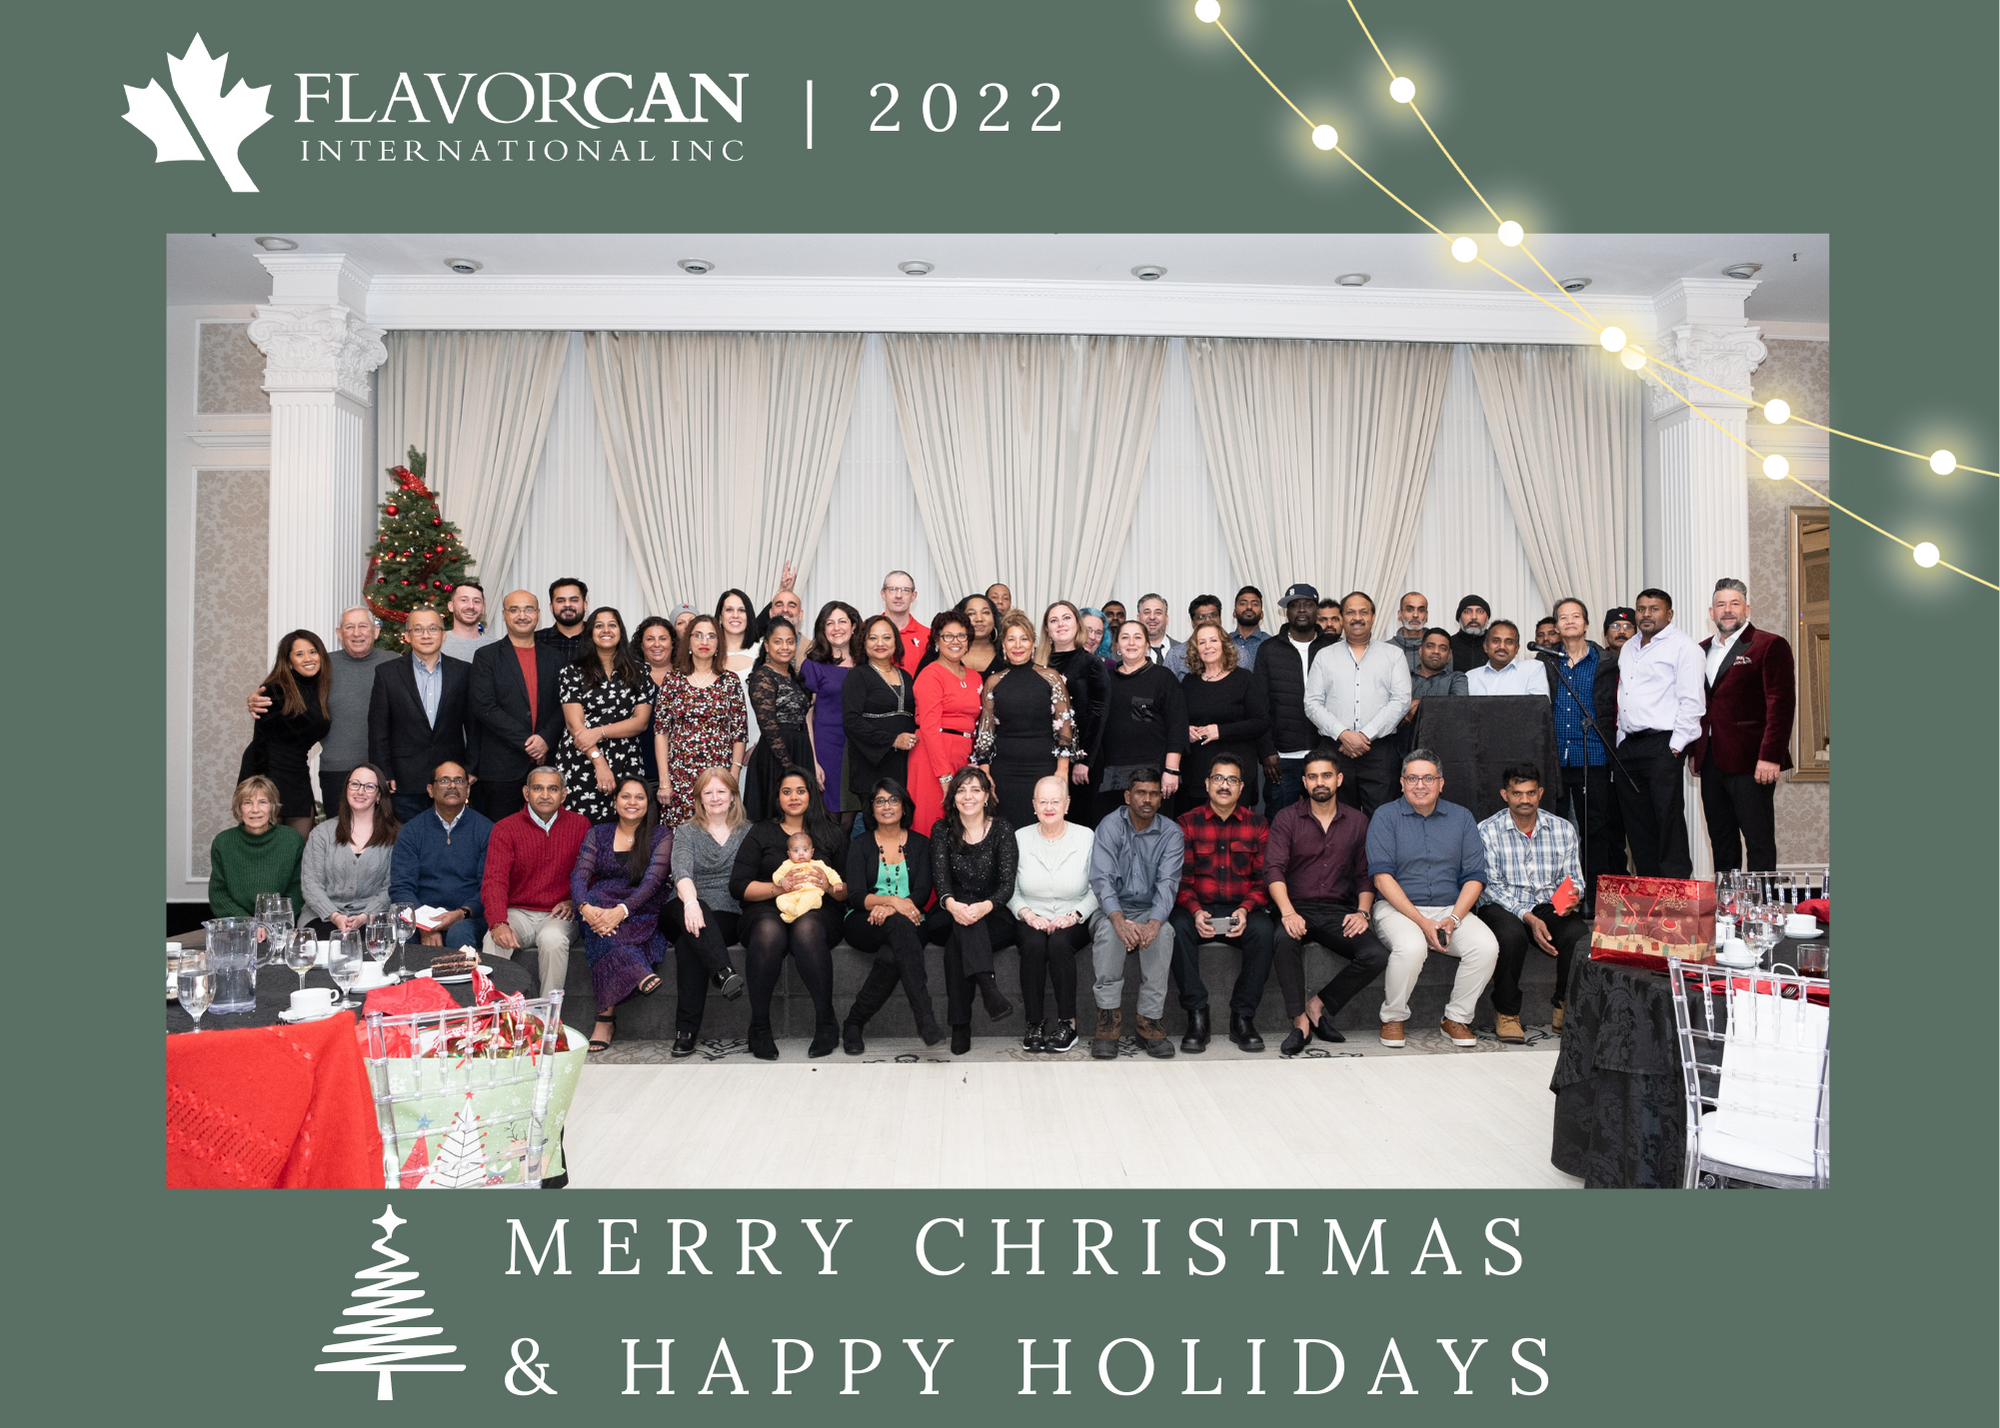 Merry Christmas from Flavorcan